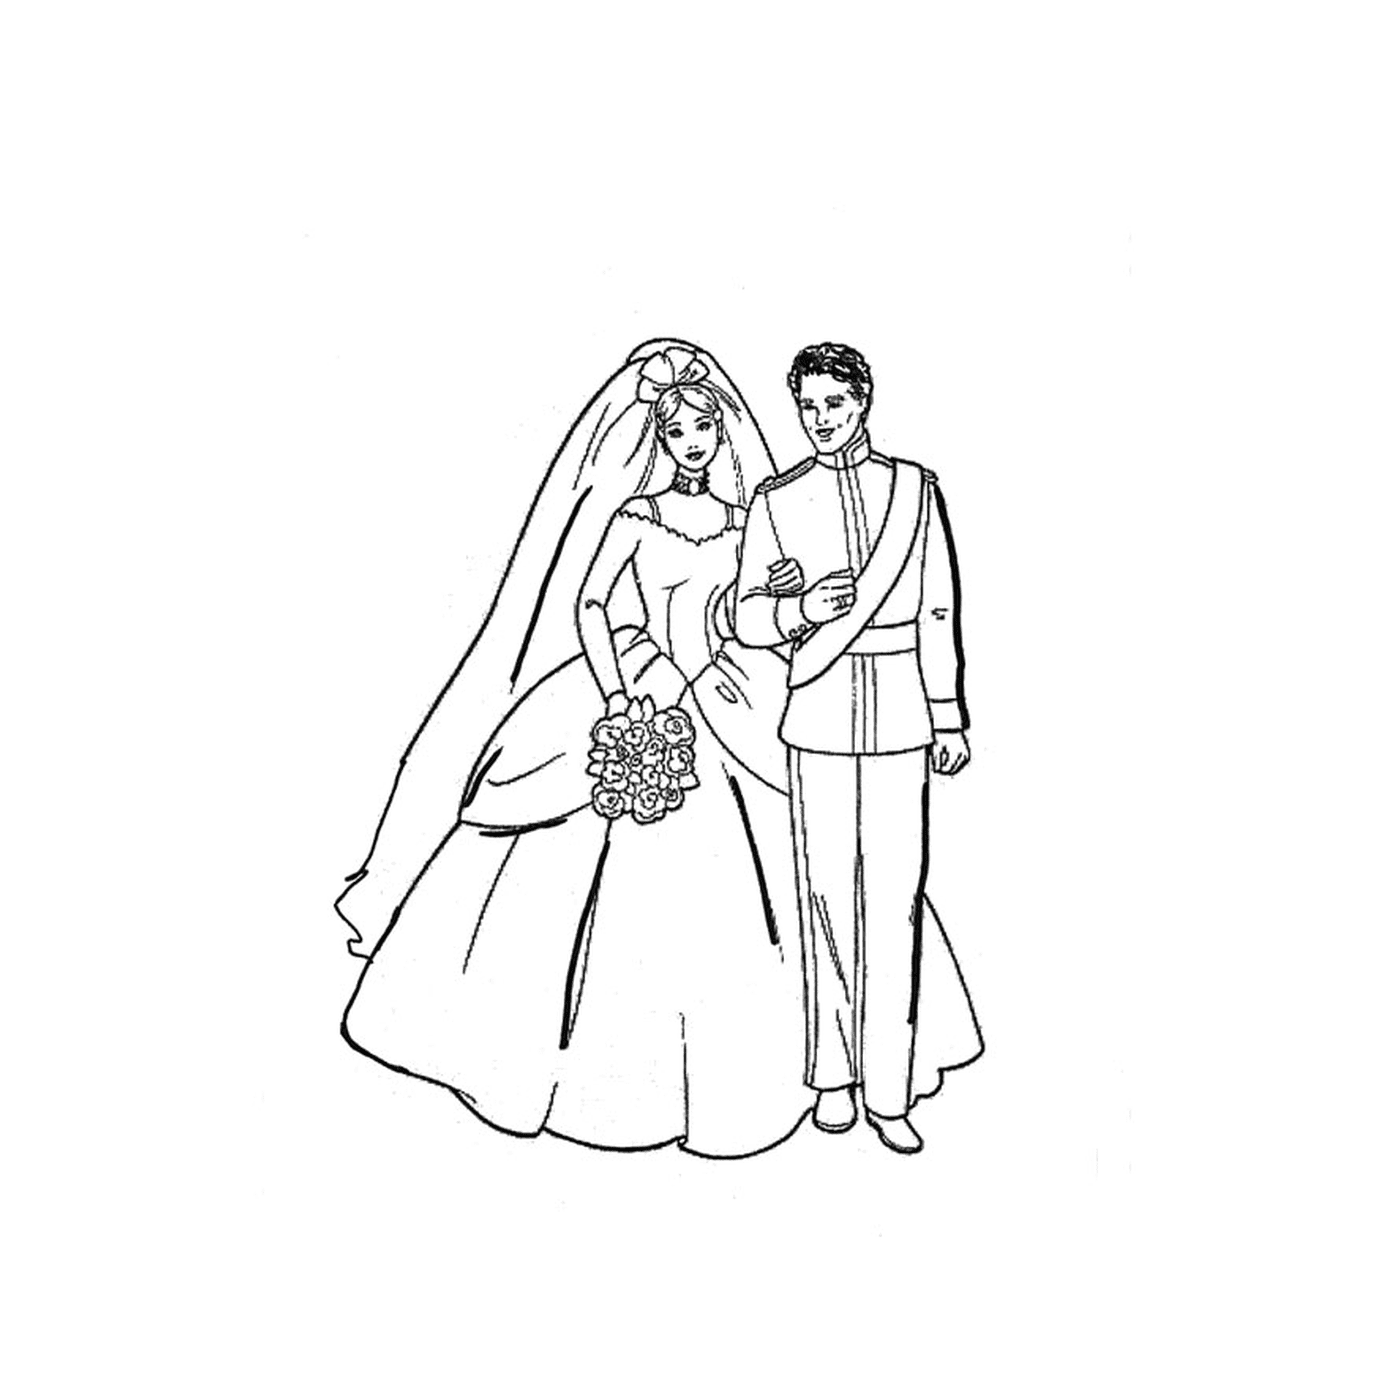  A man and a woman in a wedding dress holding together 